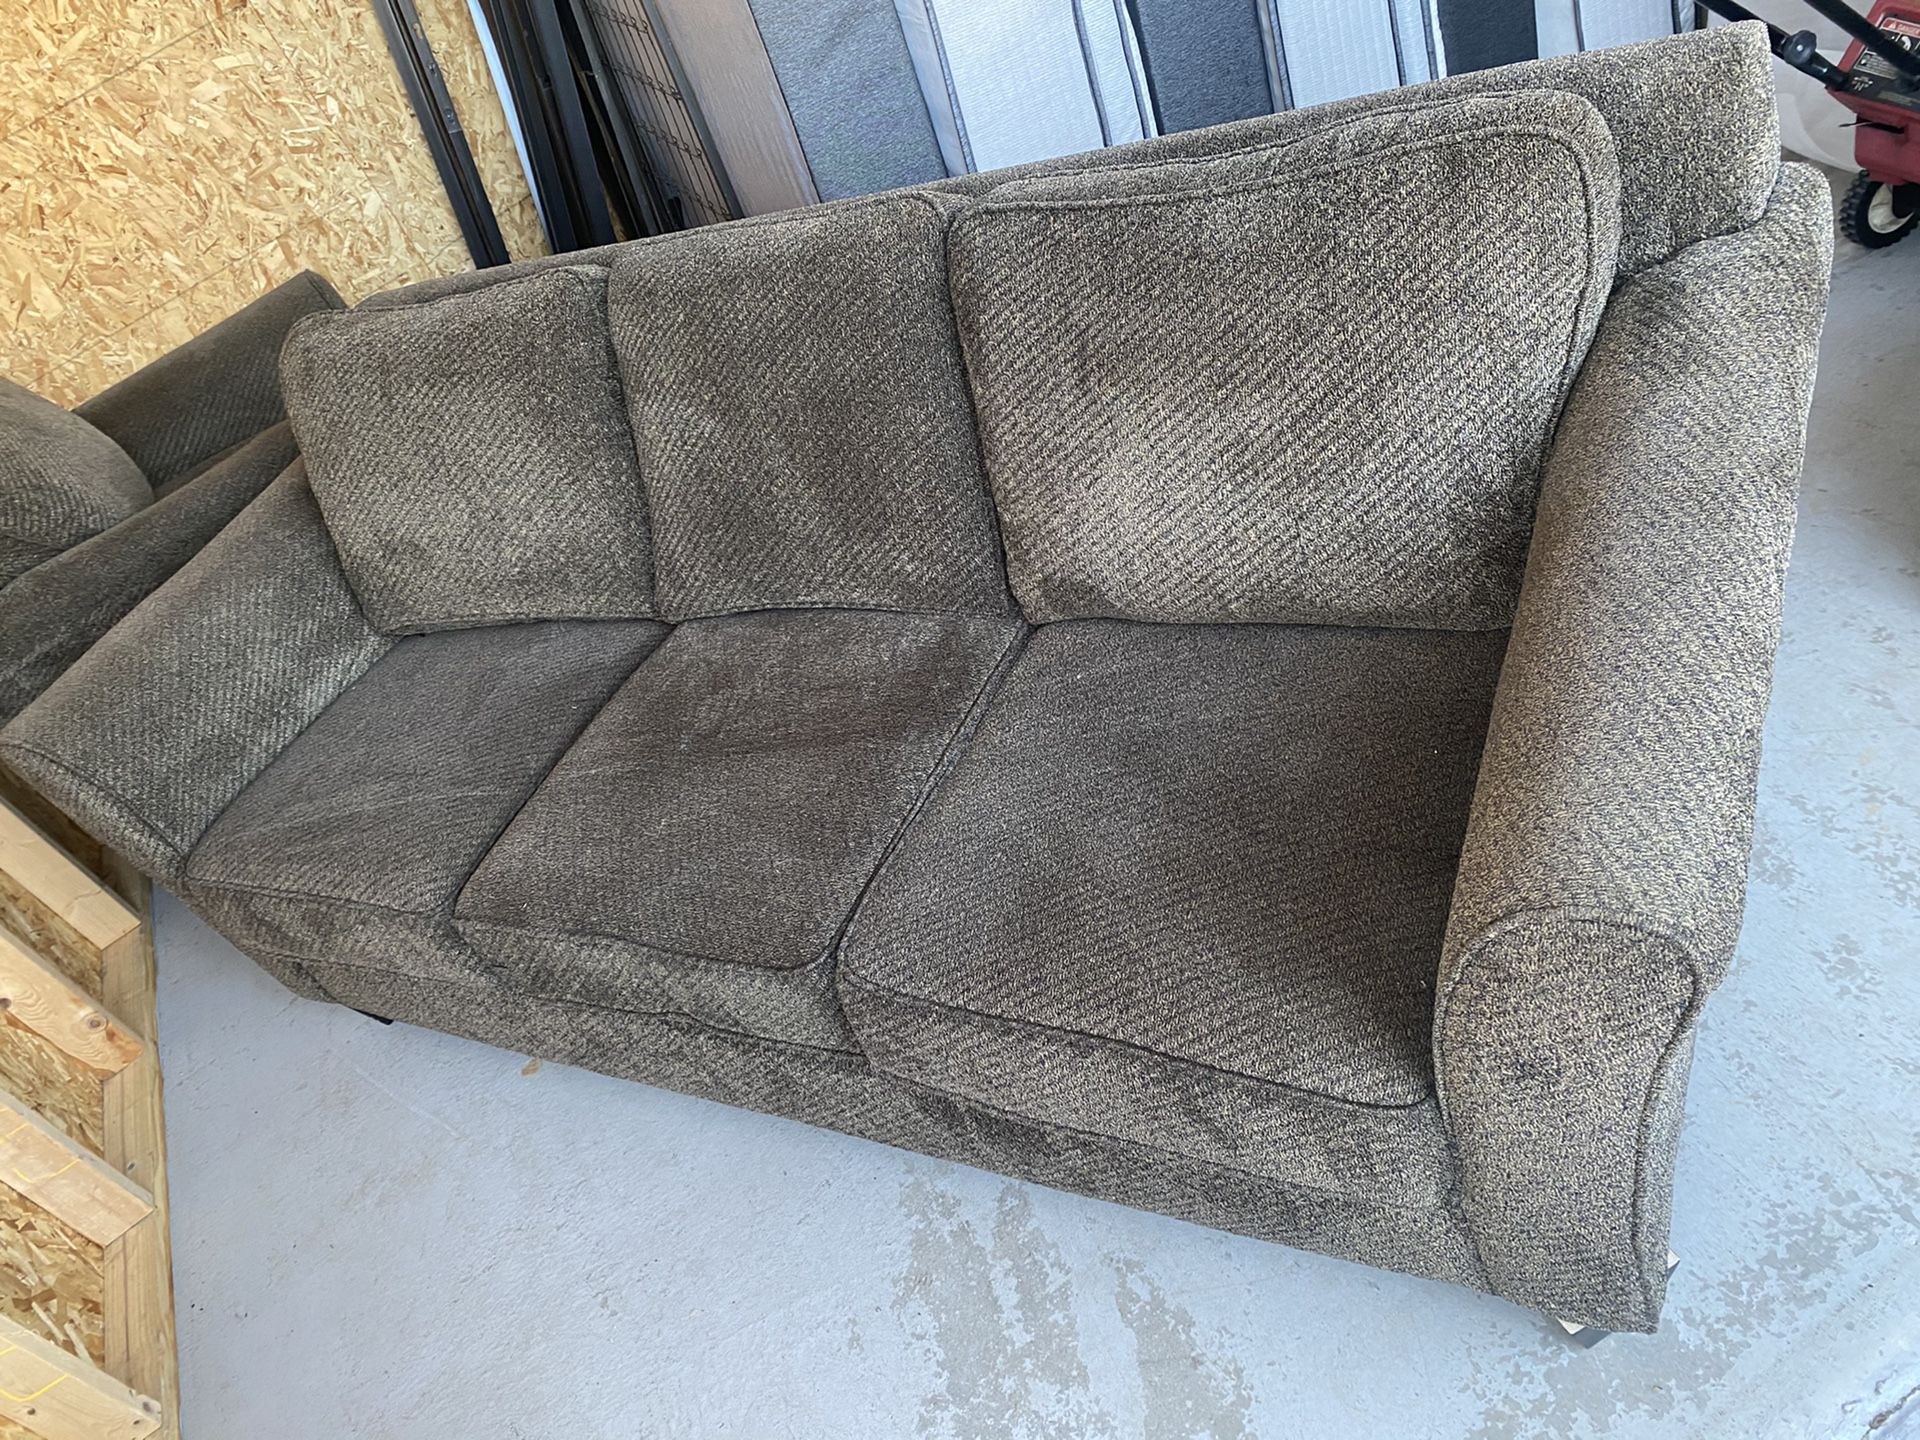 Couch and chair